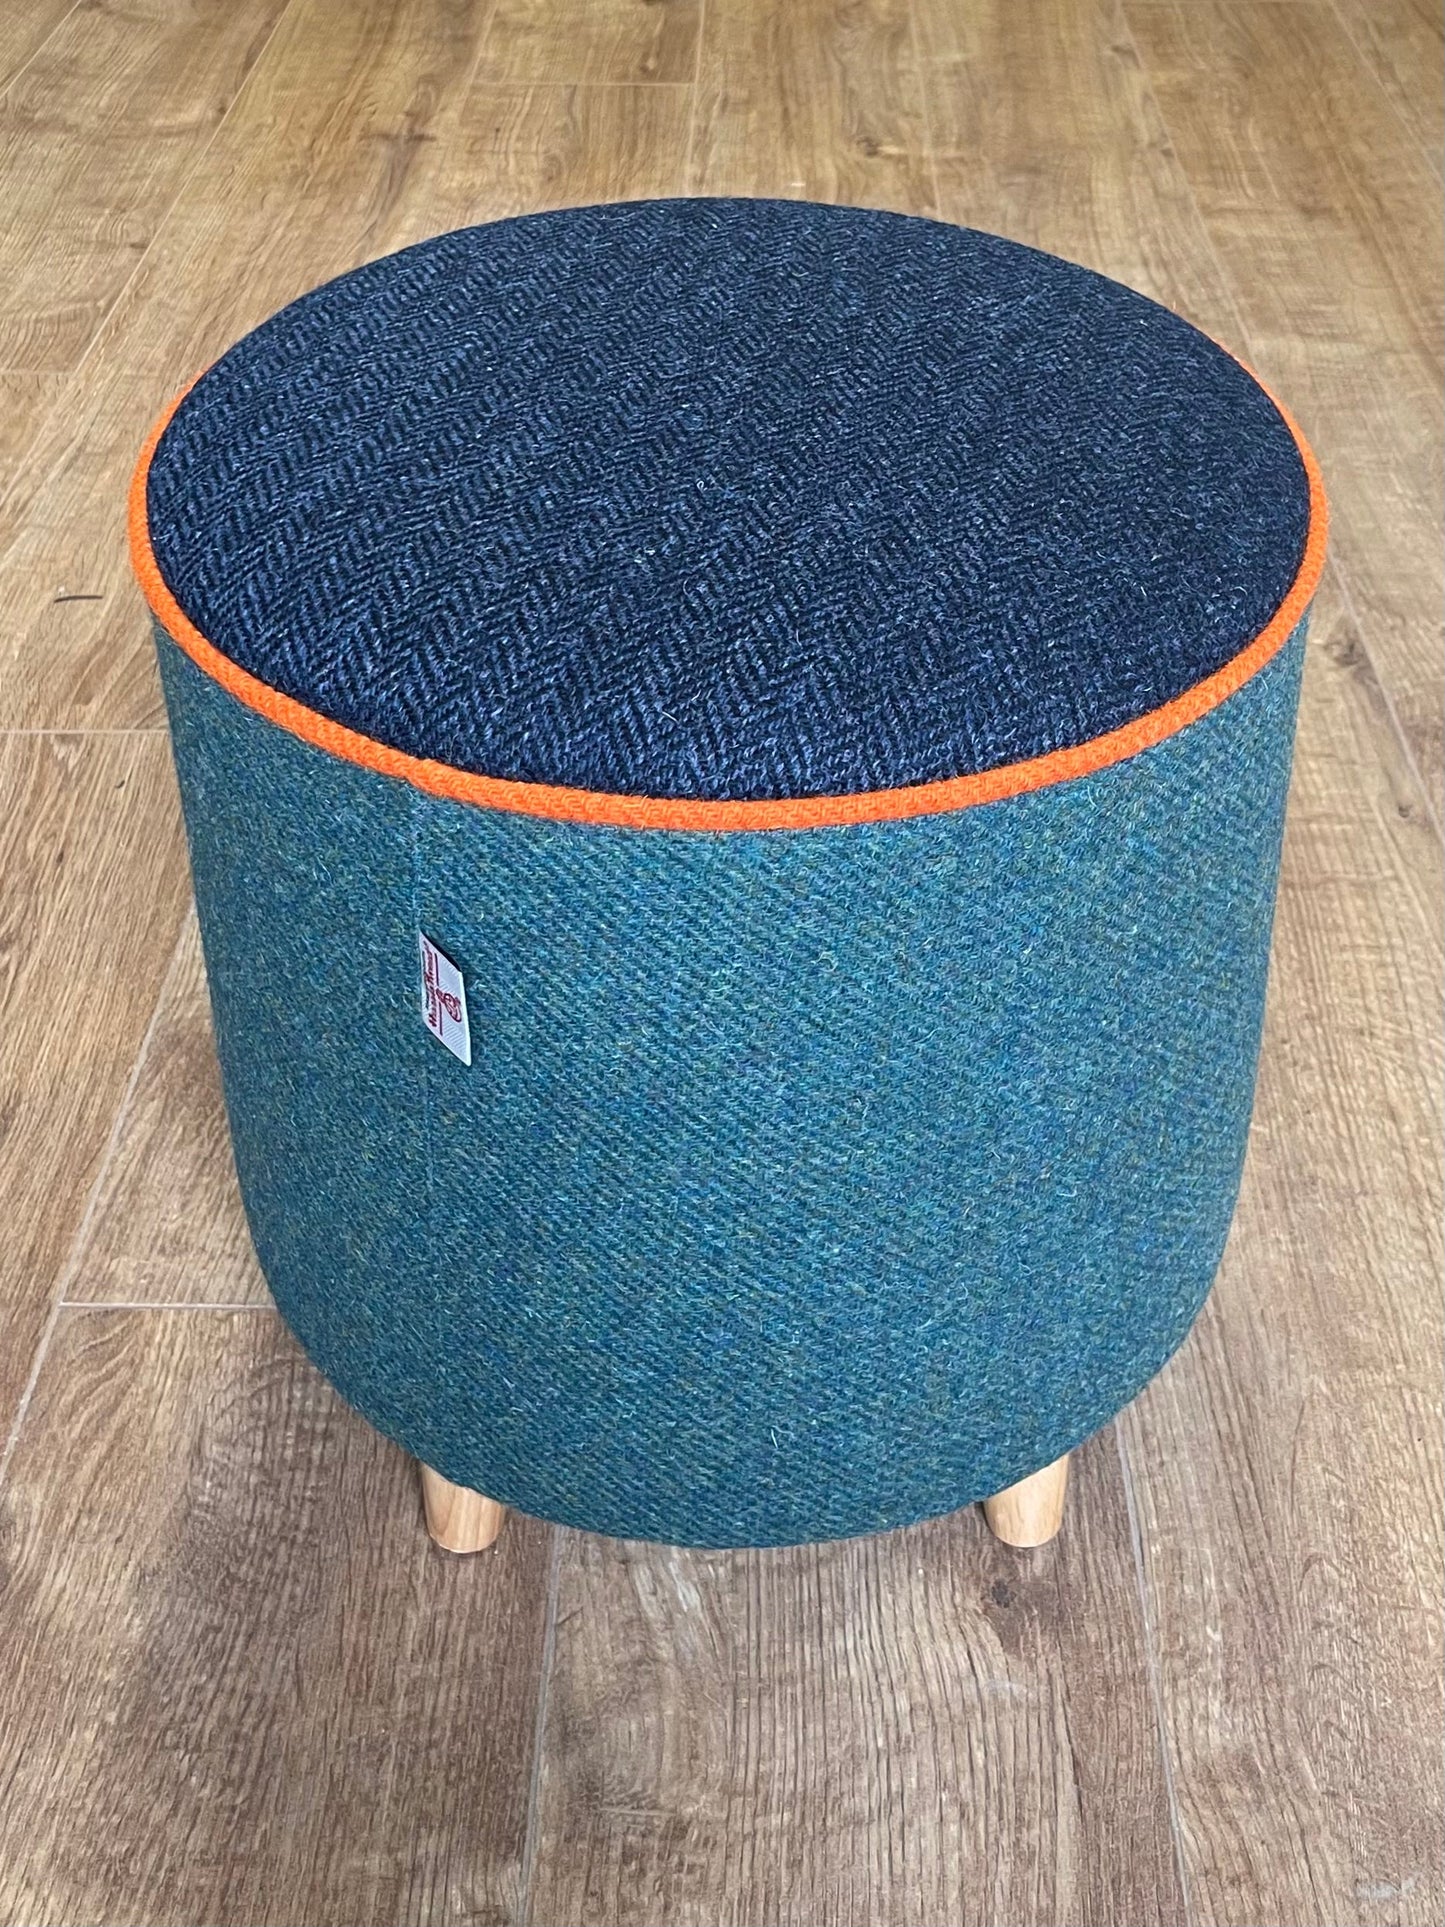 Green and Navy Harris Tweed Footstool with Orange Piping Detail